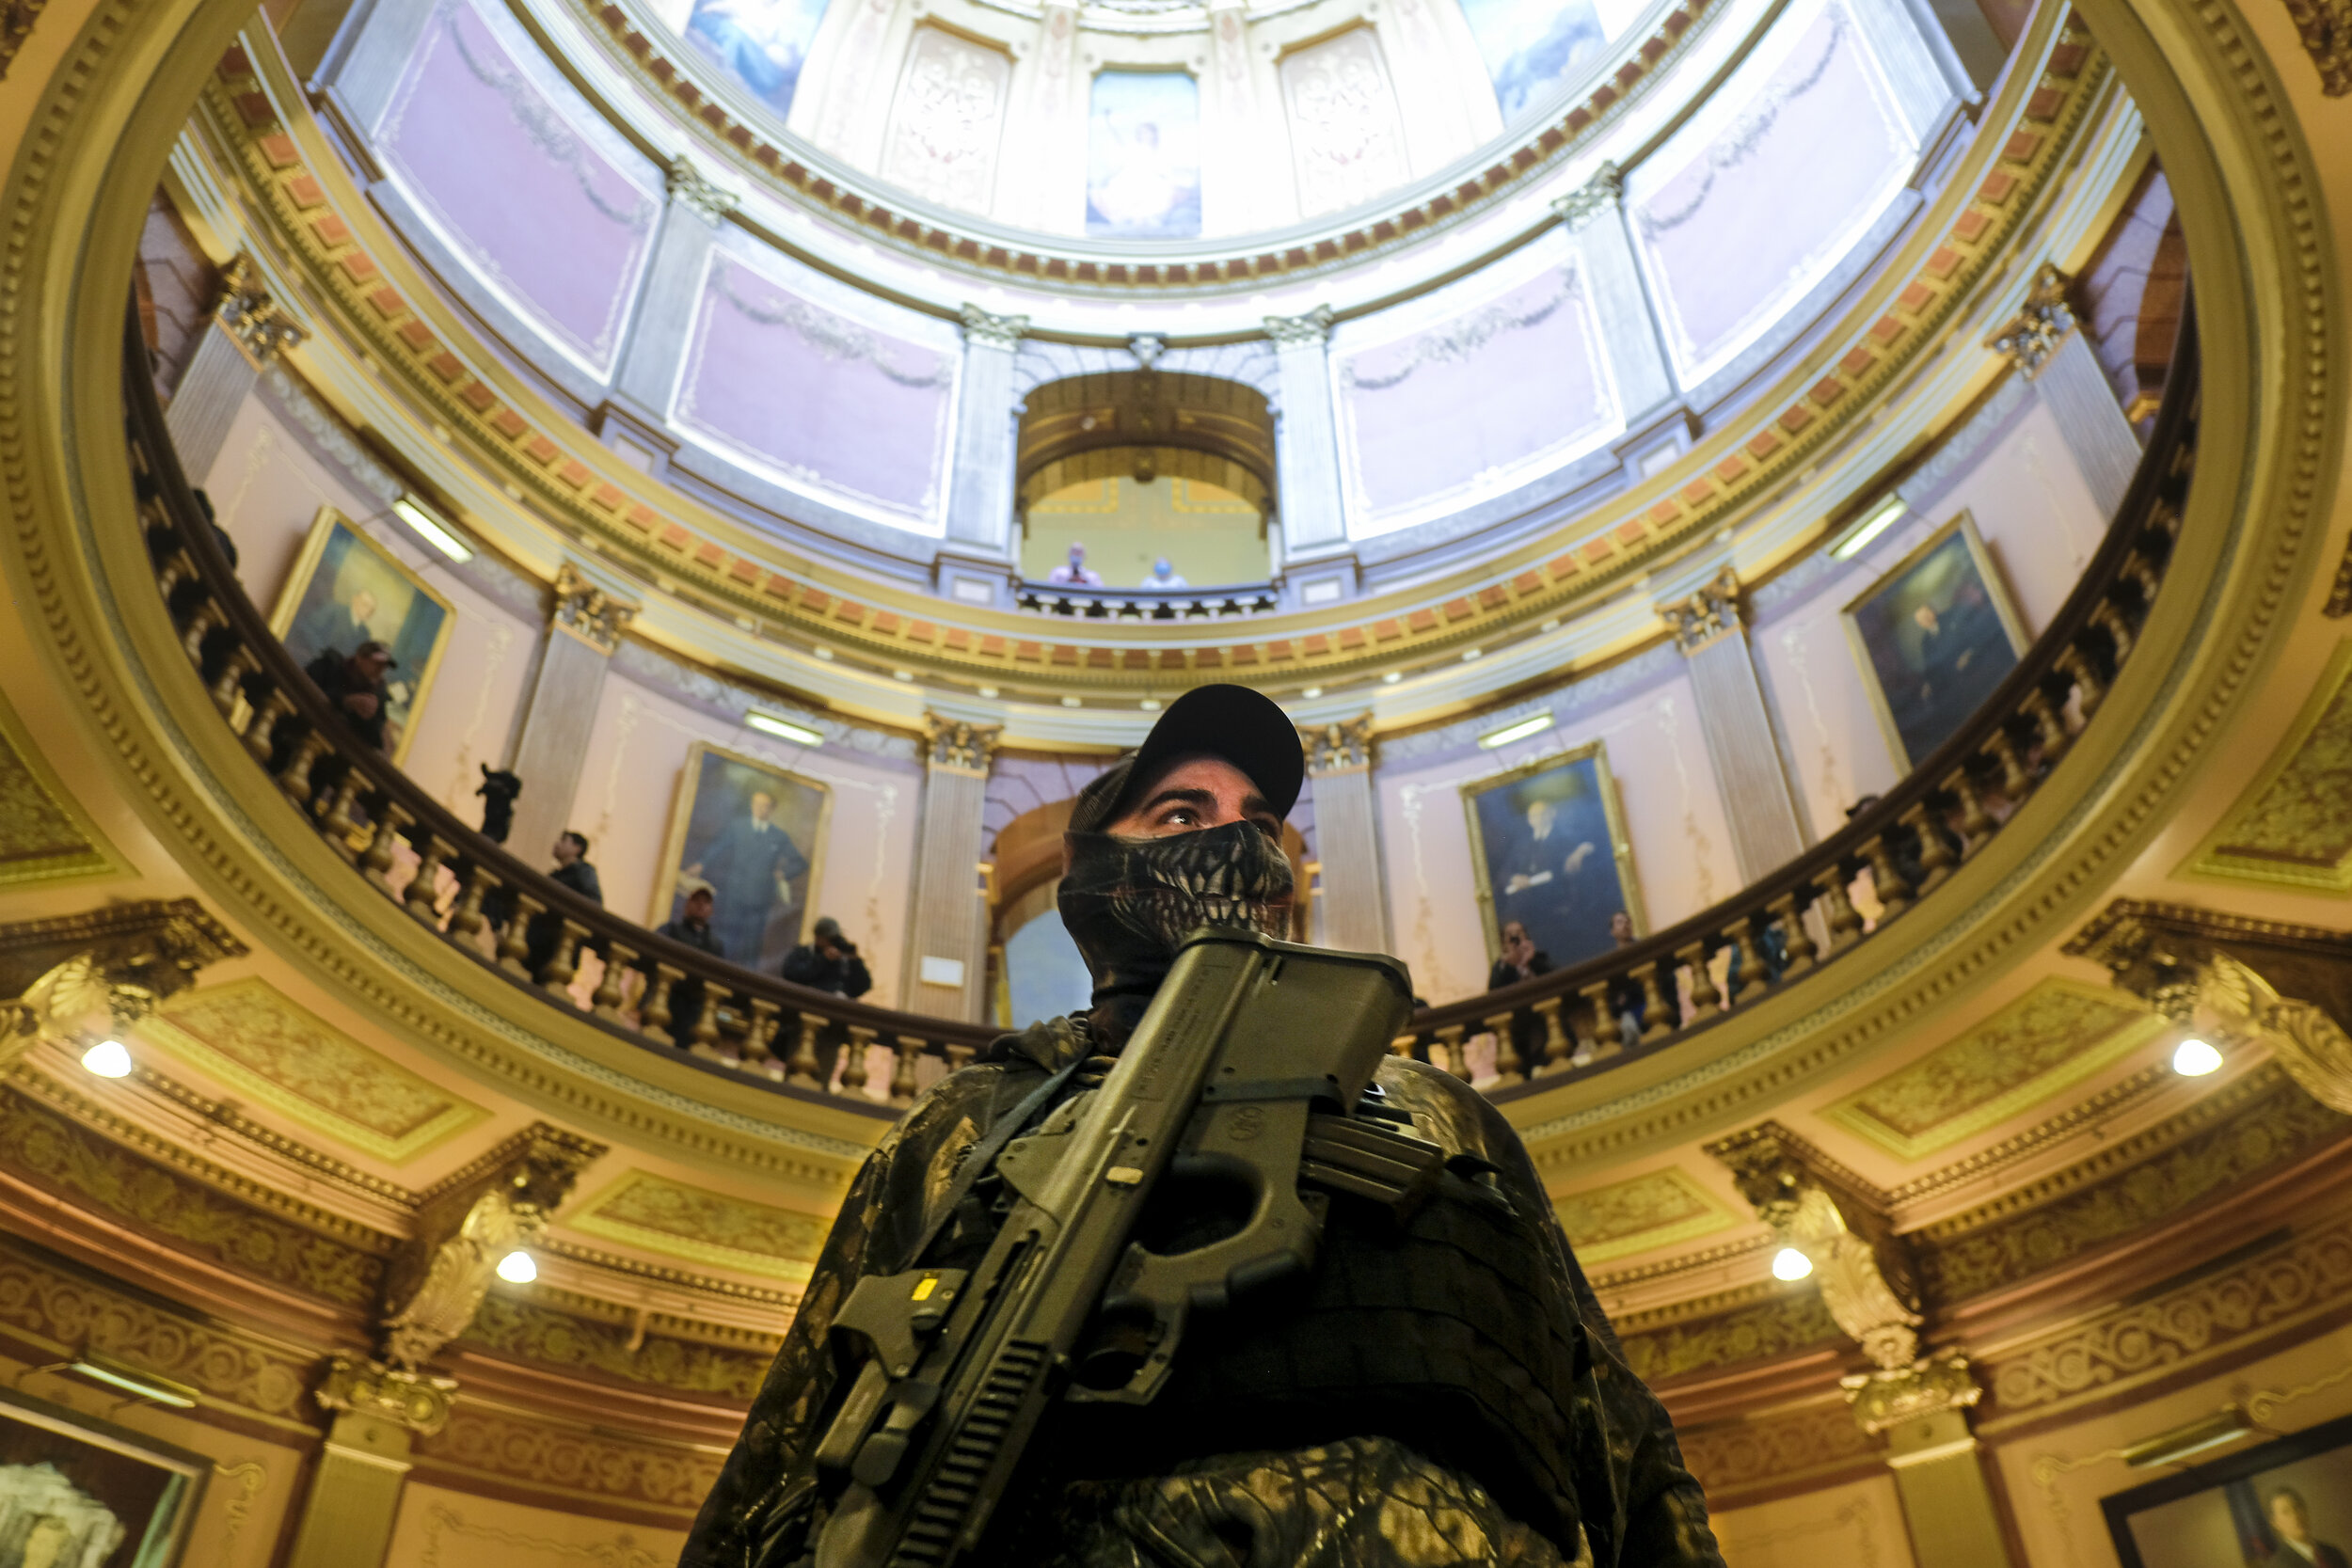  An armed member of a Michigan Militia group stands in the main rotunda of the Michigan Capitol Building as anti-lockdown protesters occupy the area outside the Senate Chamber during a large protest against Michigan Governor Gretchen Whitmer’s plan t